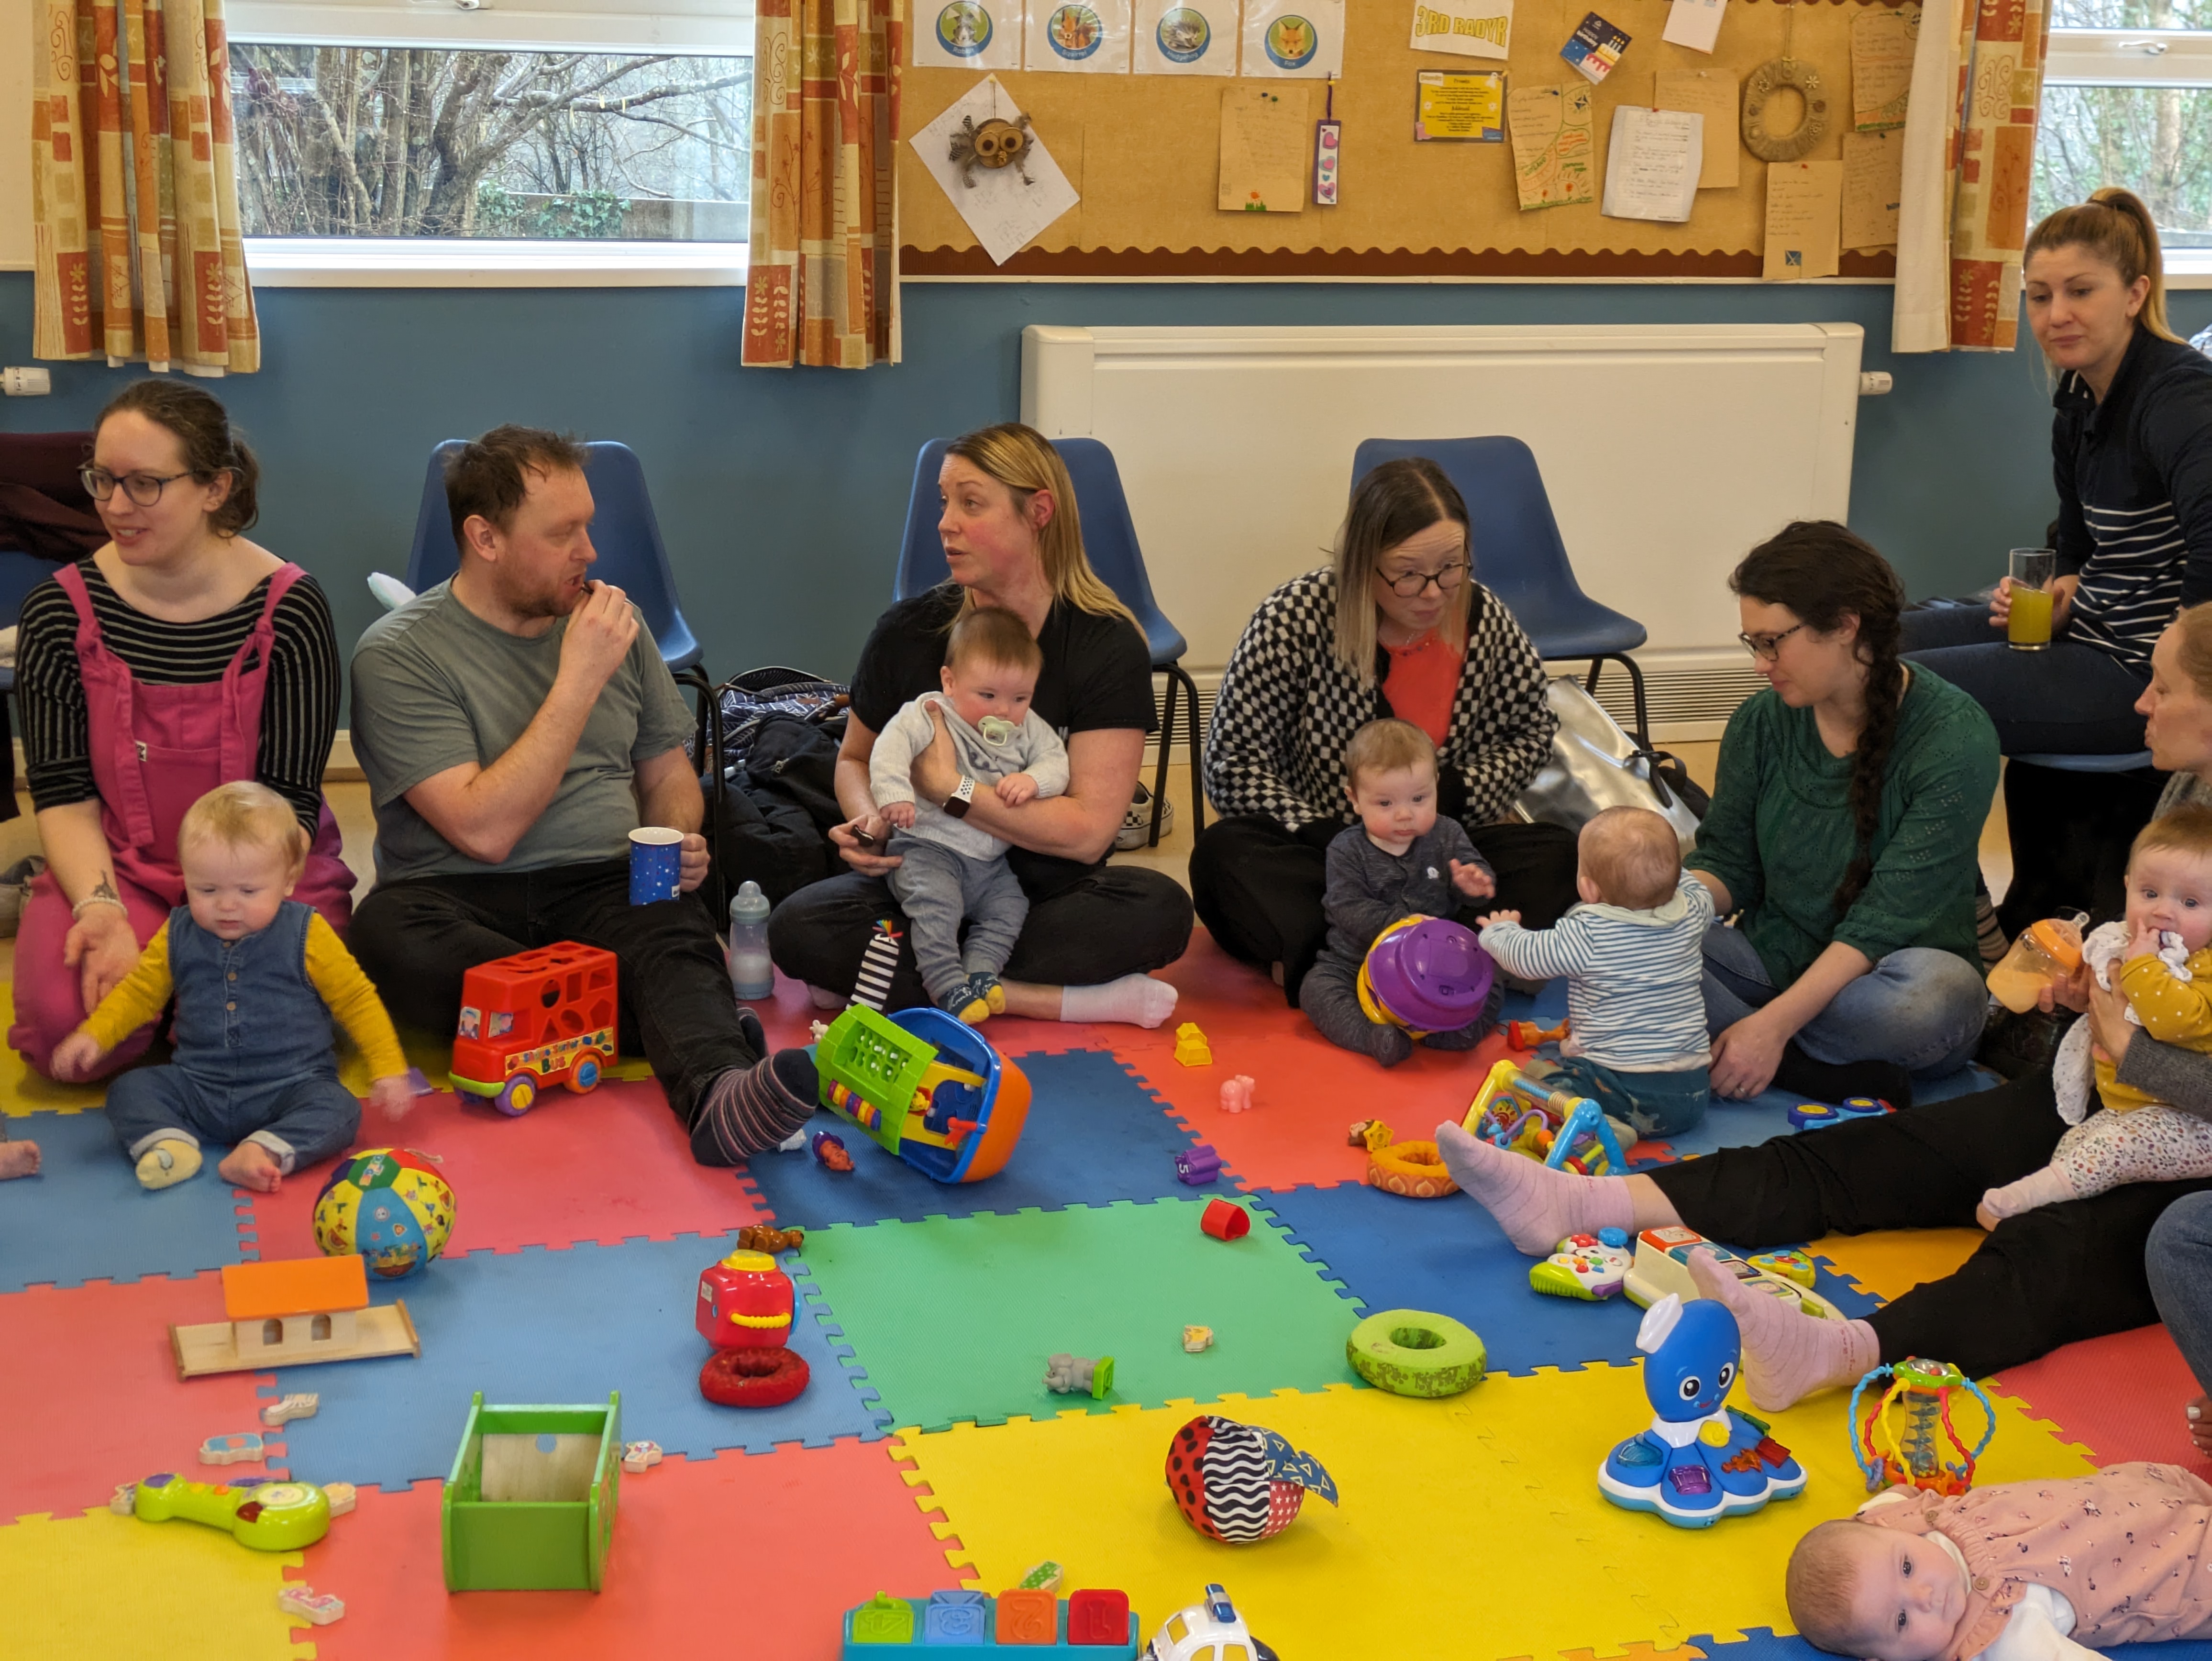 TinyTalk North and East Cardiff Baby Siging Classes – Friday